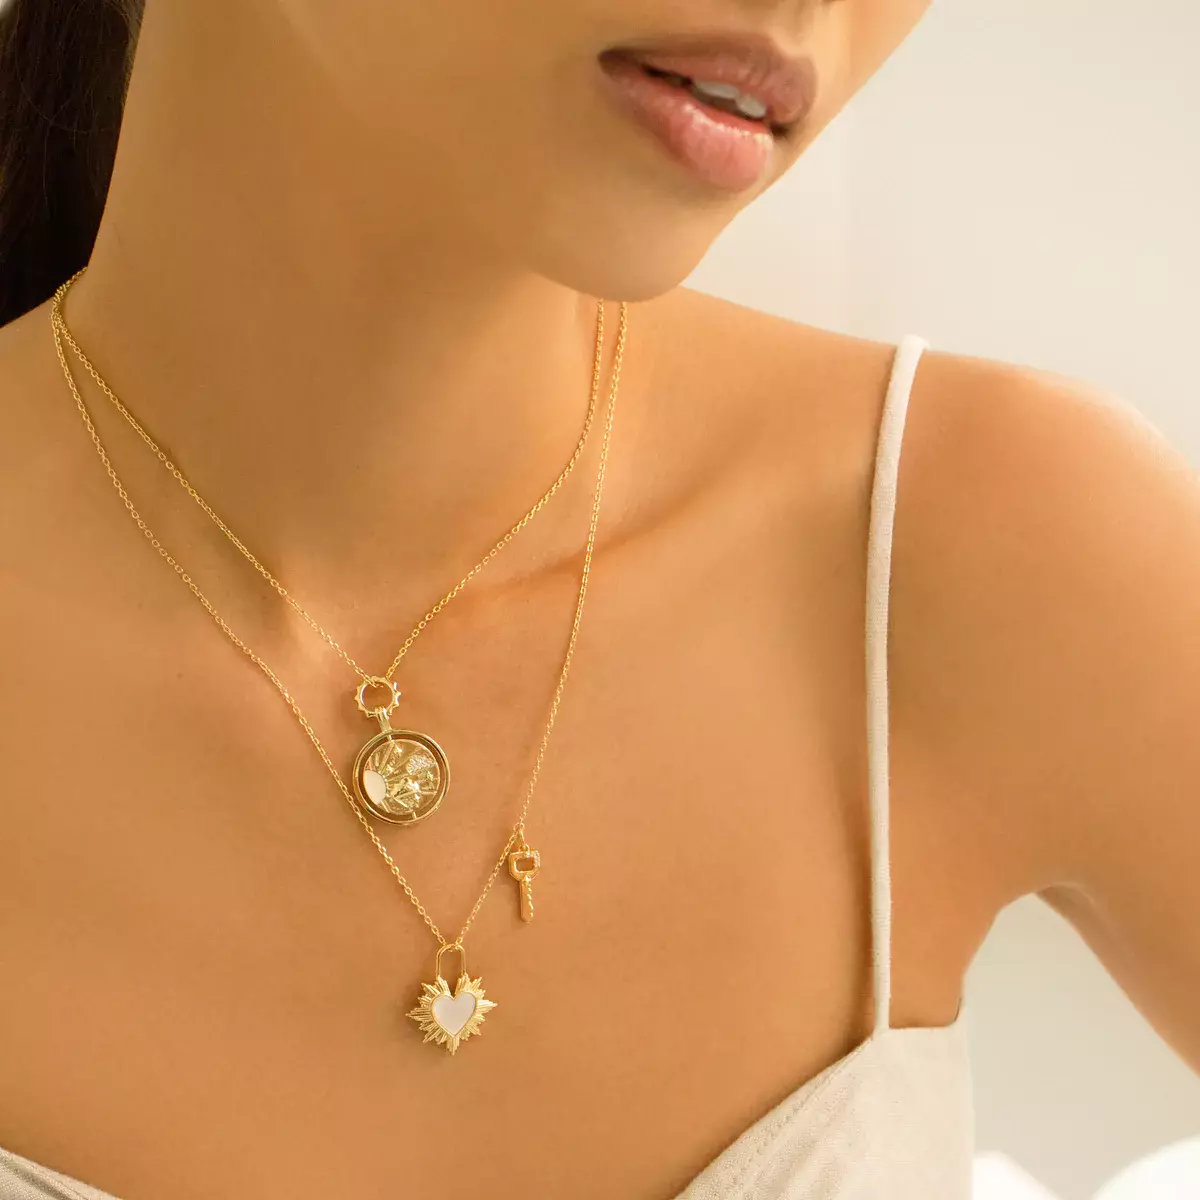 Where Love Lives Gold Mantra Necklace